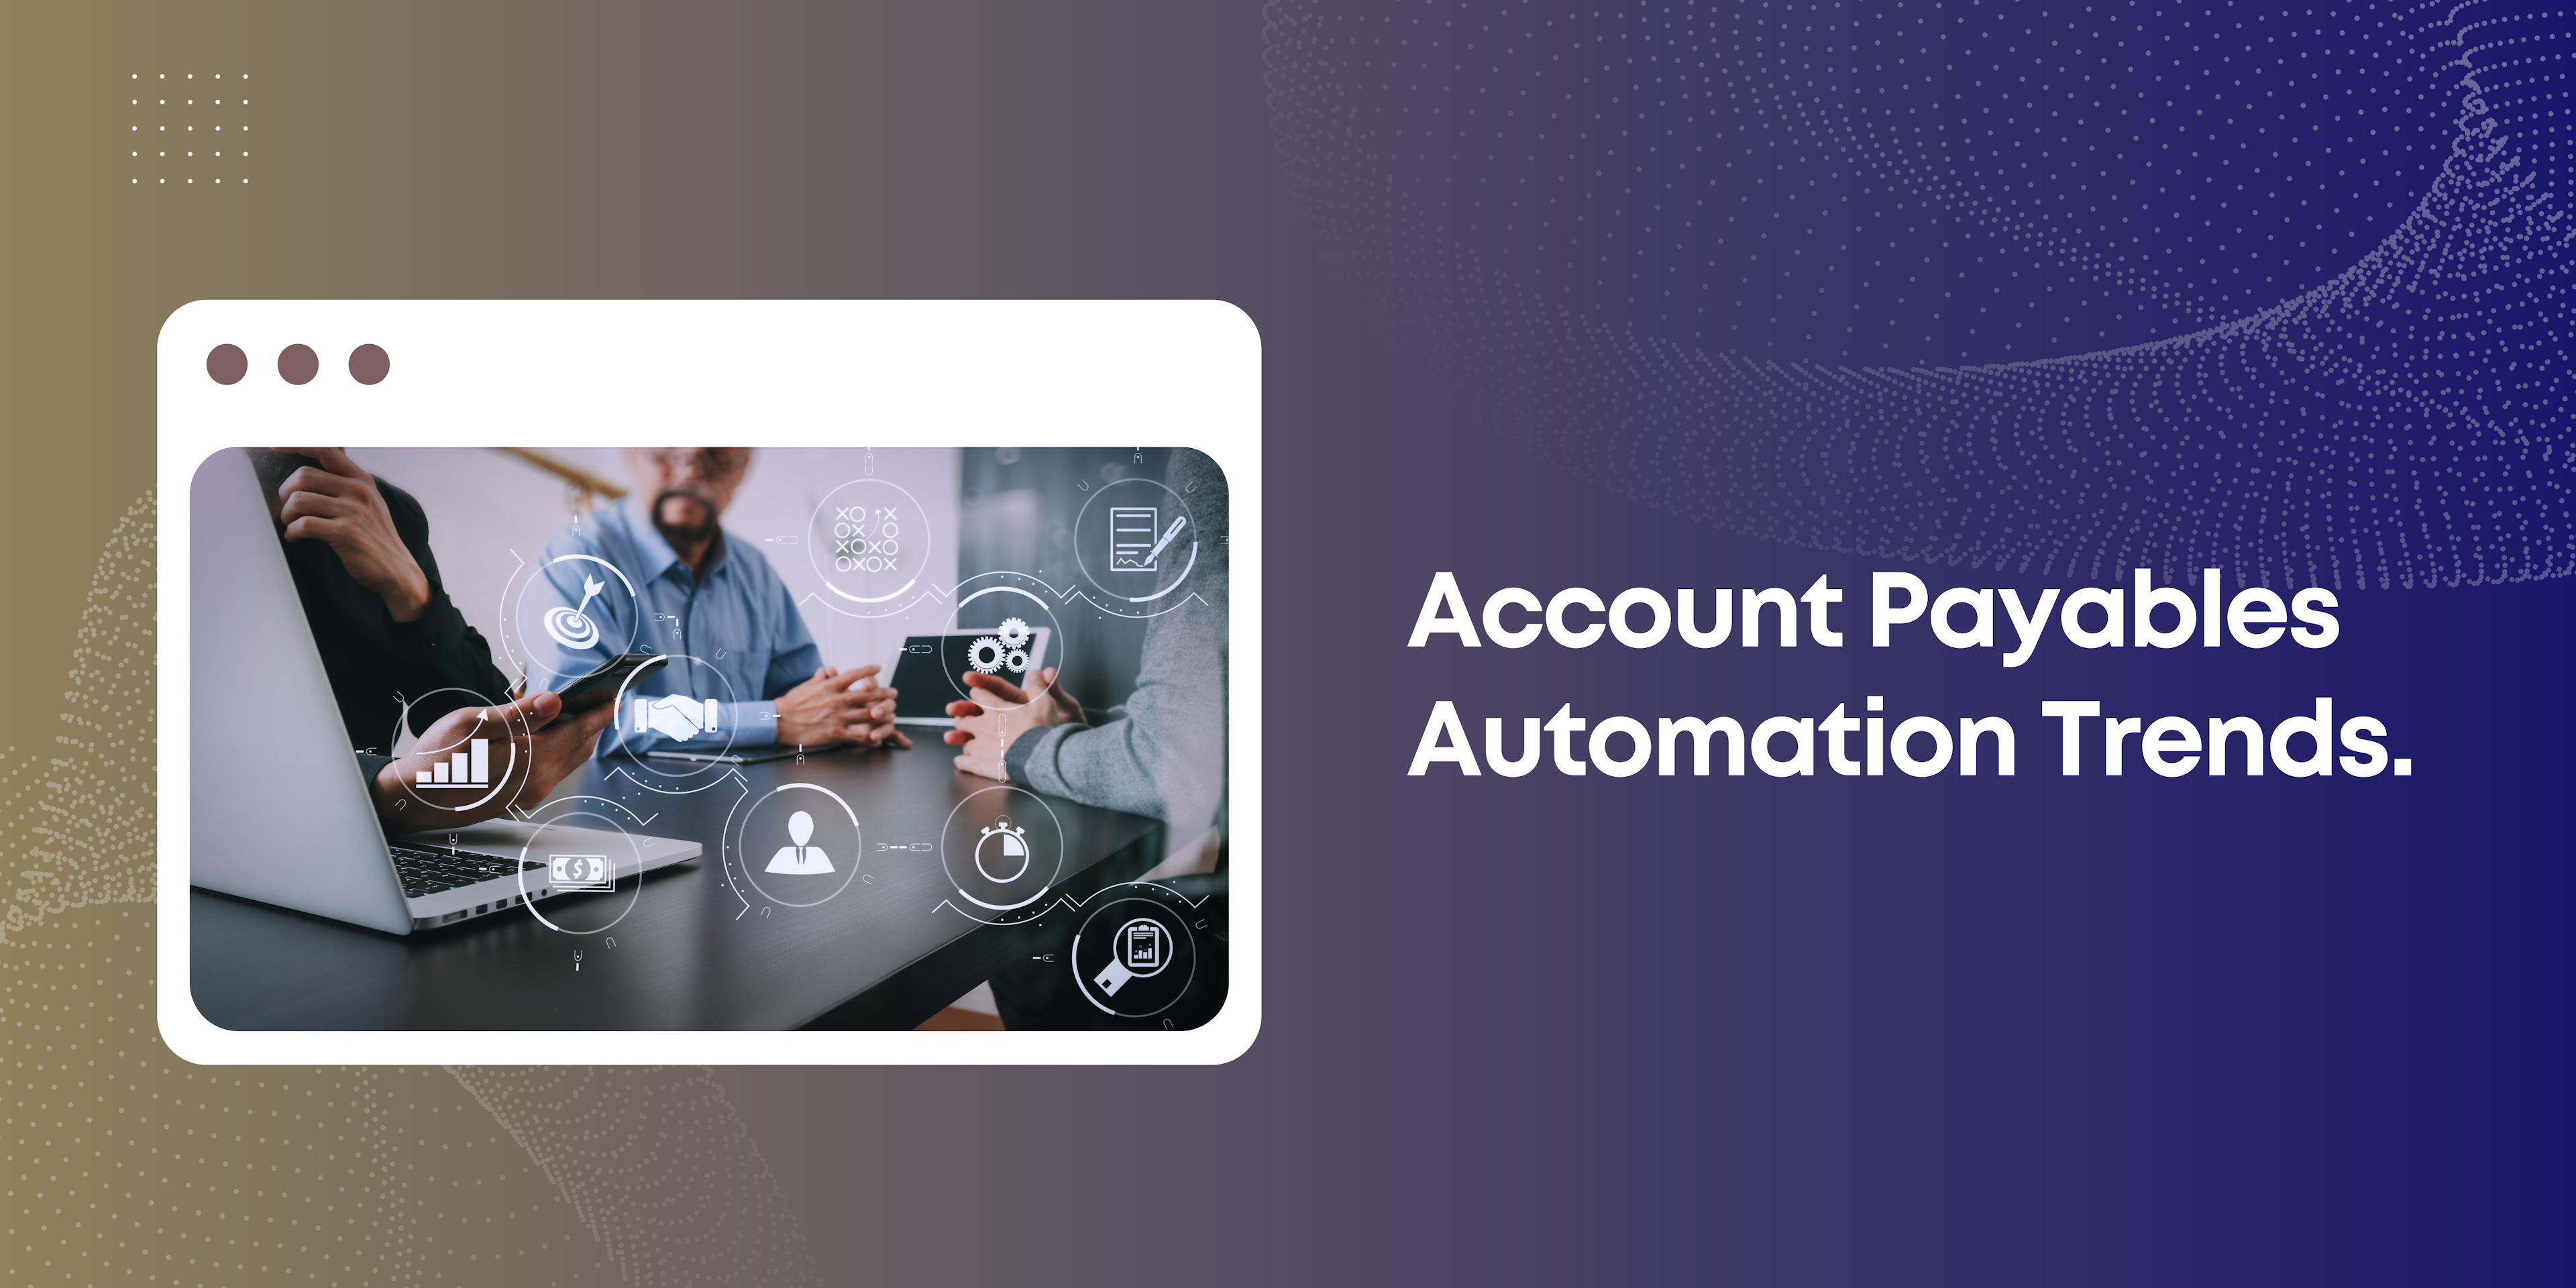 New trends in account payables automation increase efficiency and strategic financial management